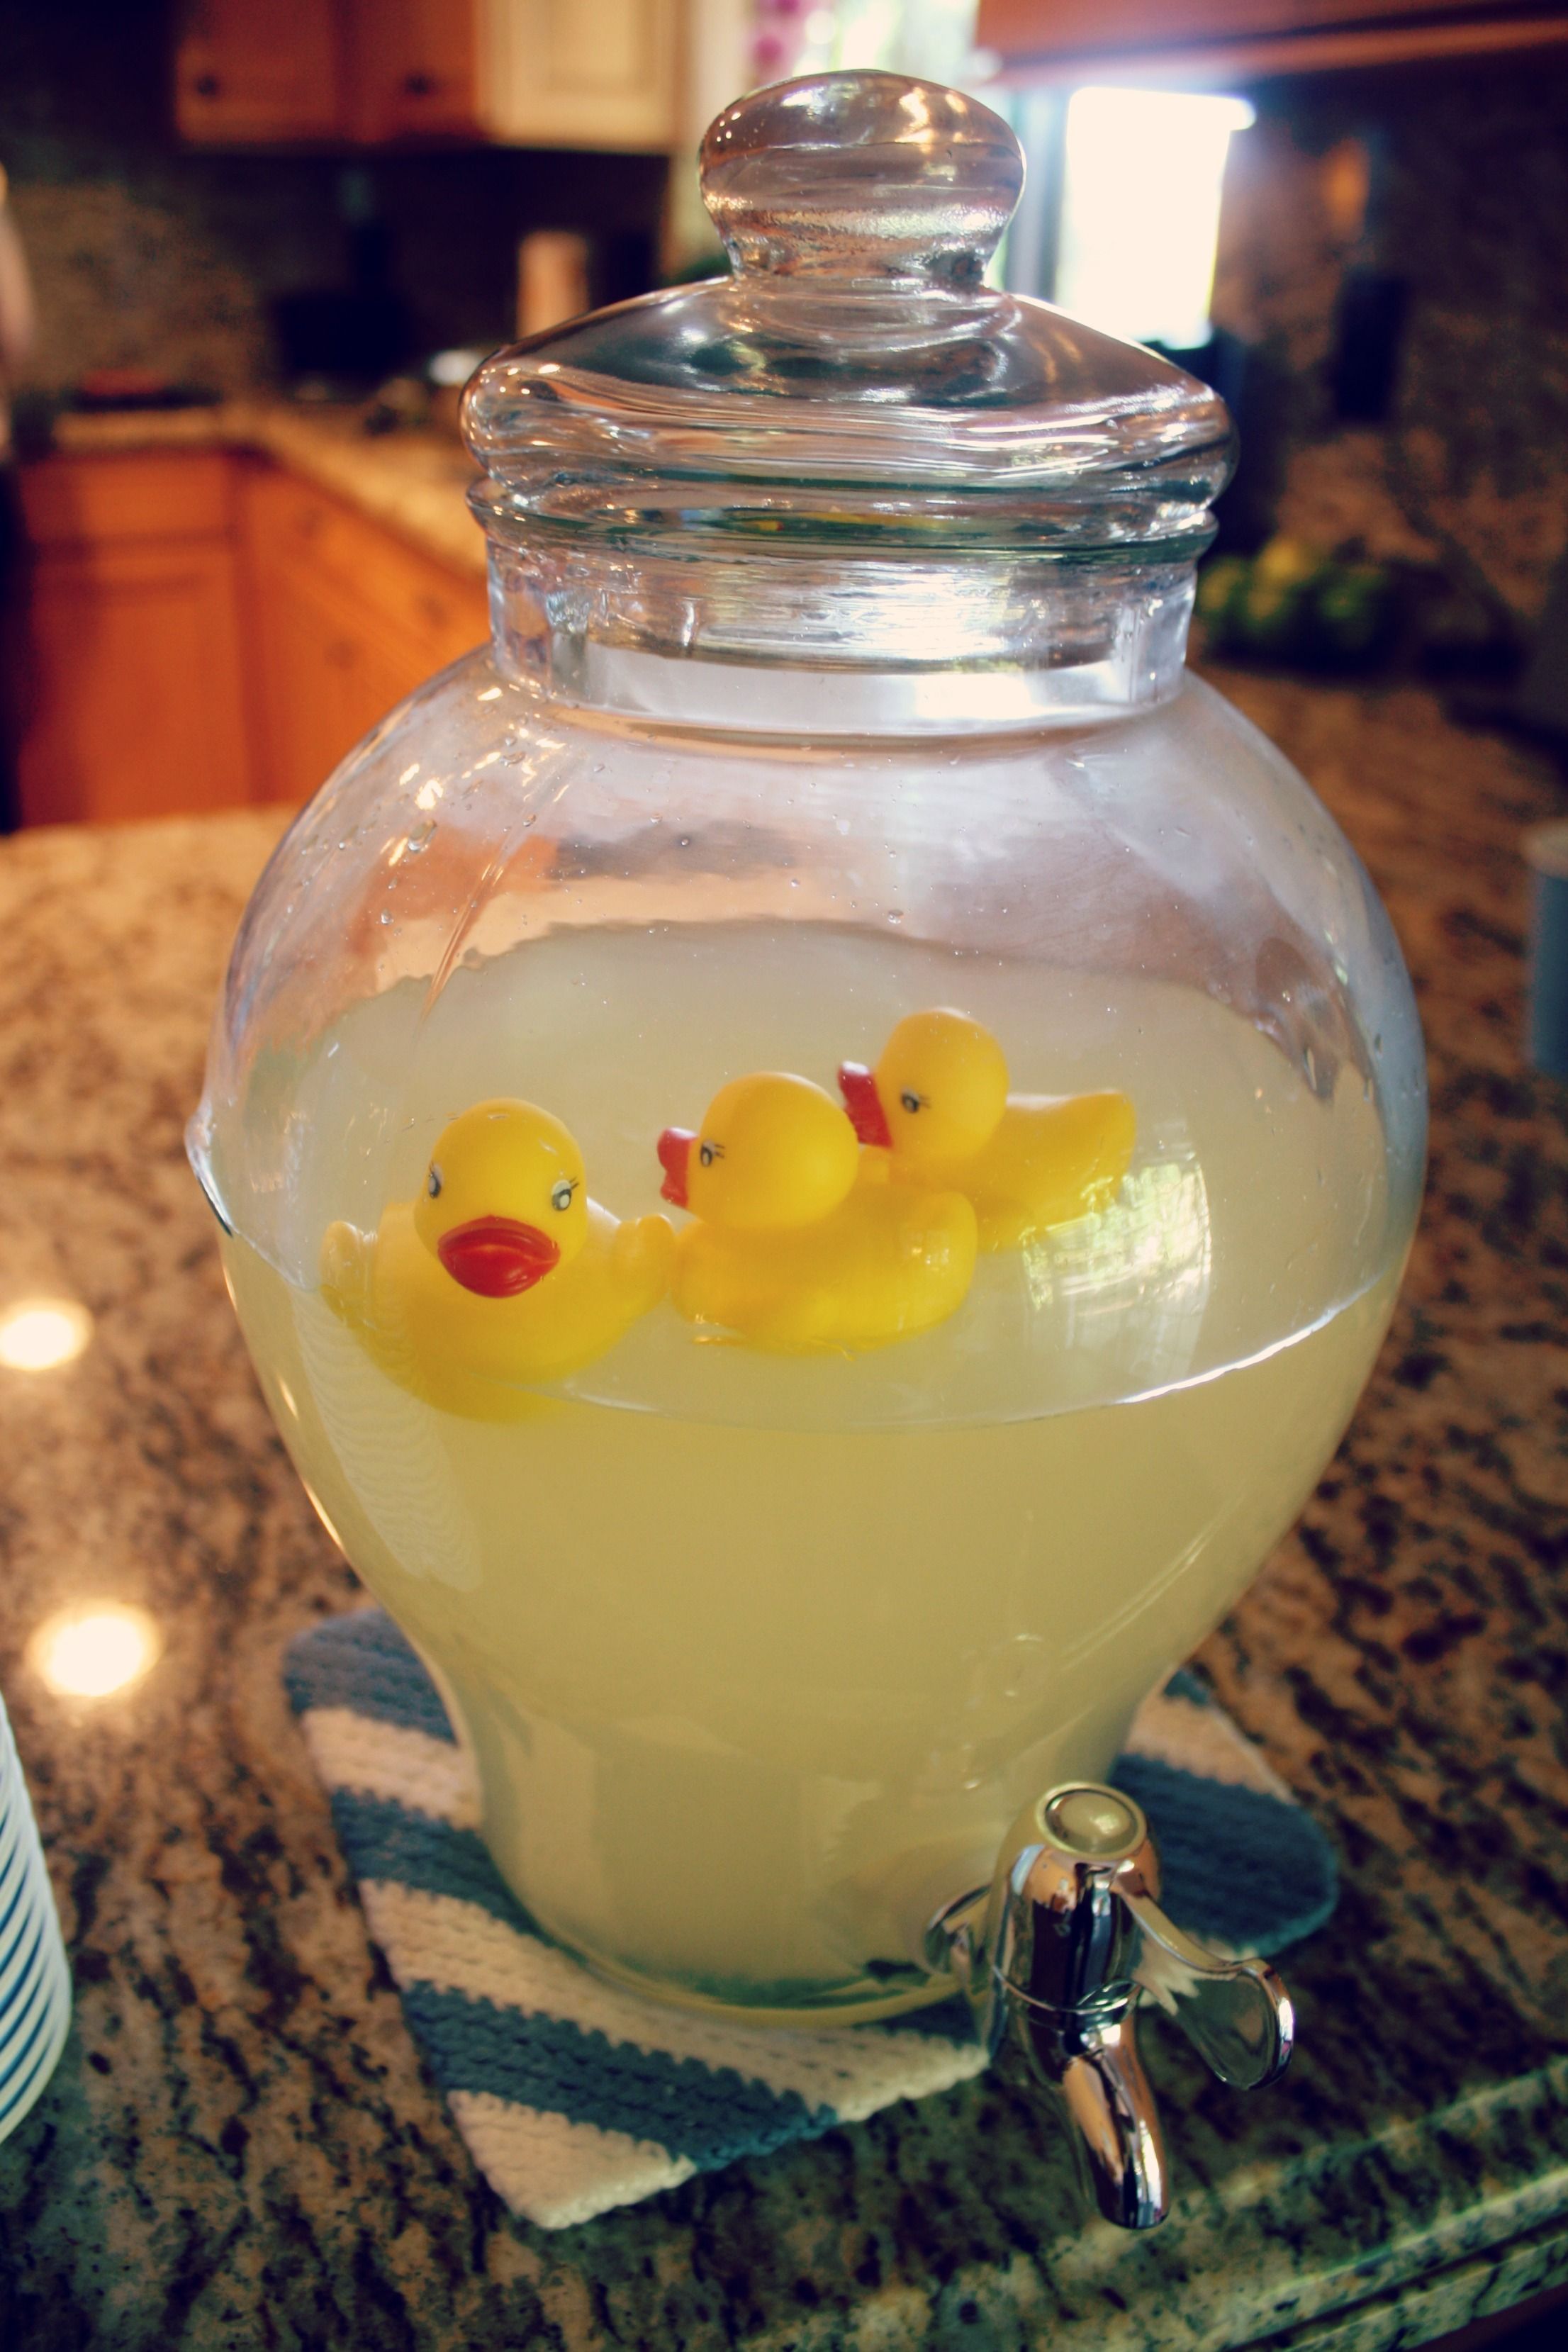 baby shower lemonade I say instead of the ducks use Bunnys bc that’s what she is